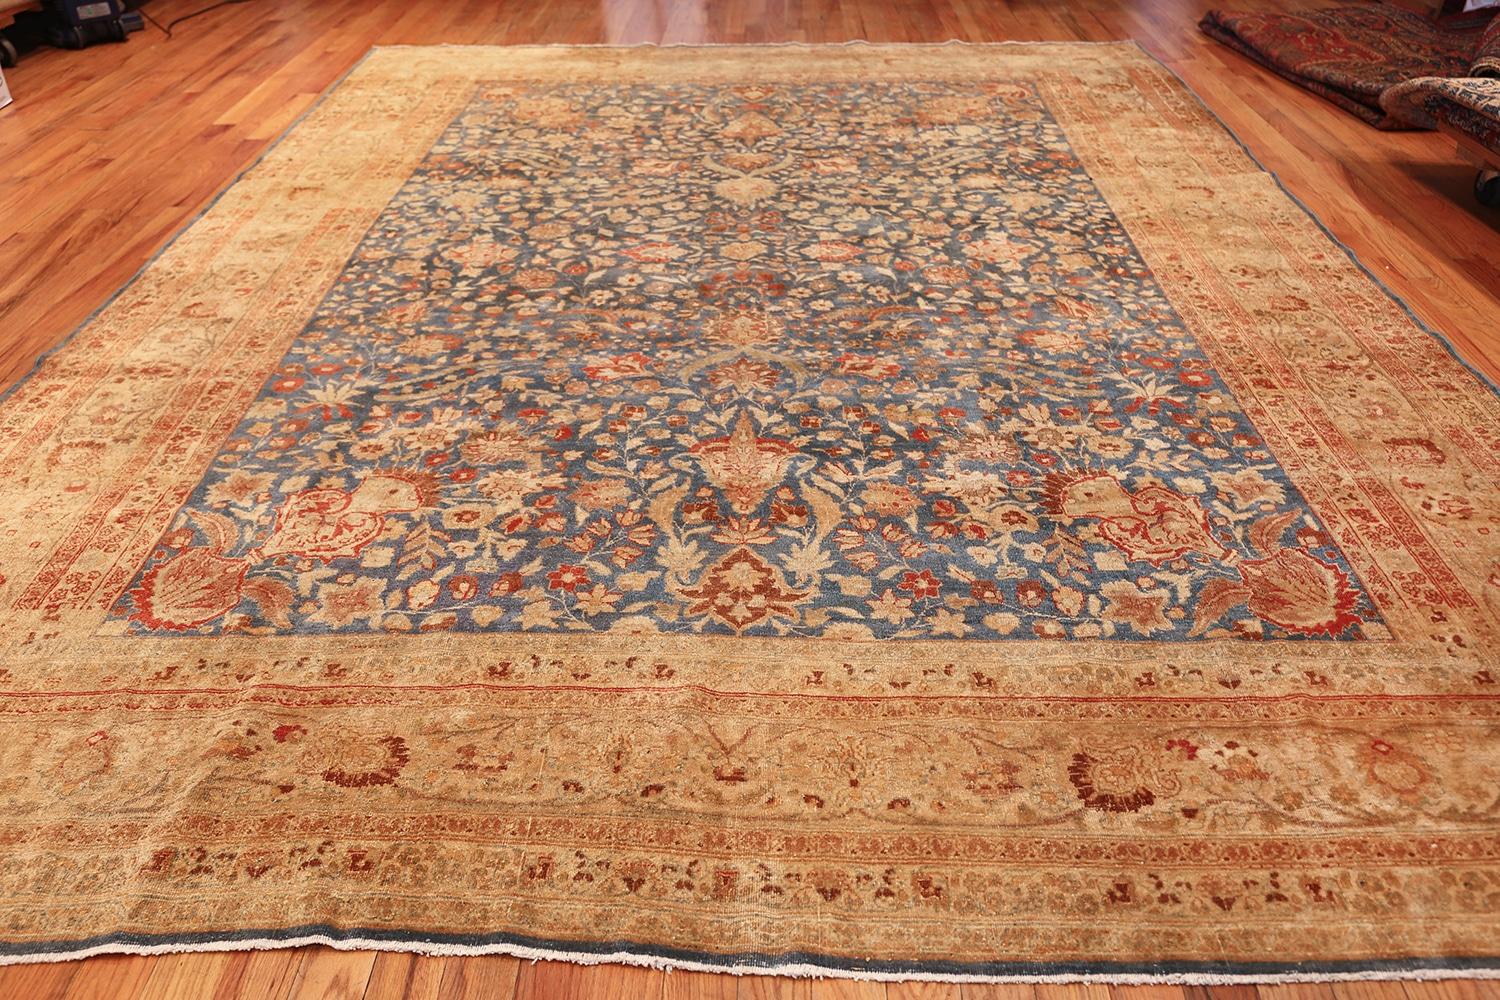 Breathtaking Antique Room Size Blue and Rust Persian Khorassan Rug 10' x 14'6